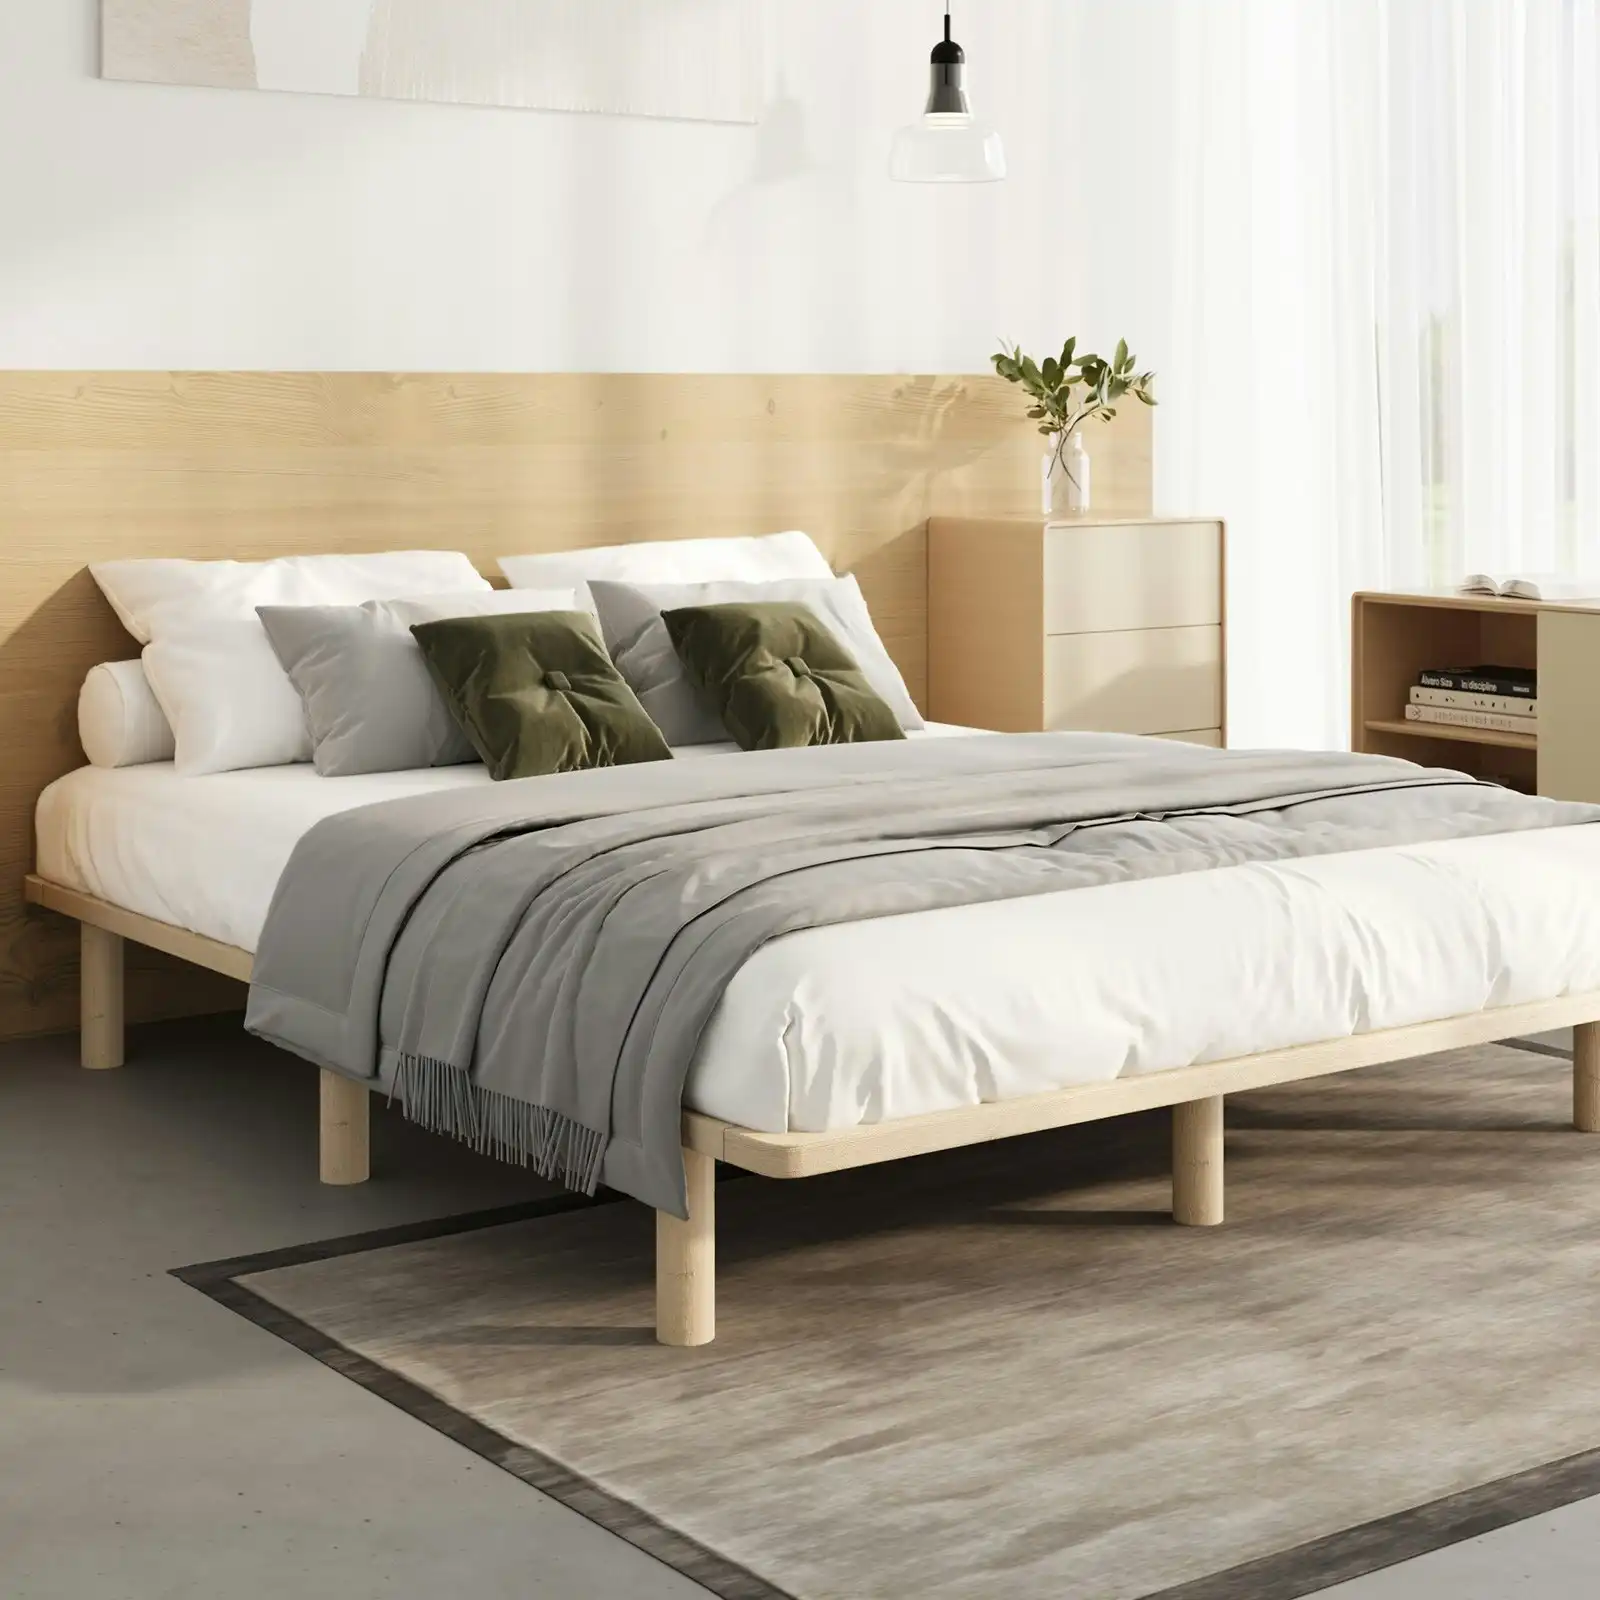 Oikiture Bed Frame Double Size Wooden Bed Base Platform Timber